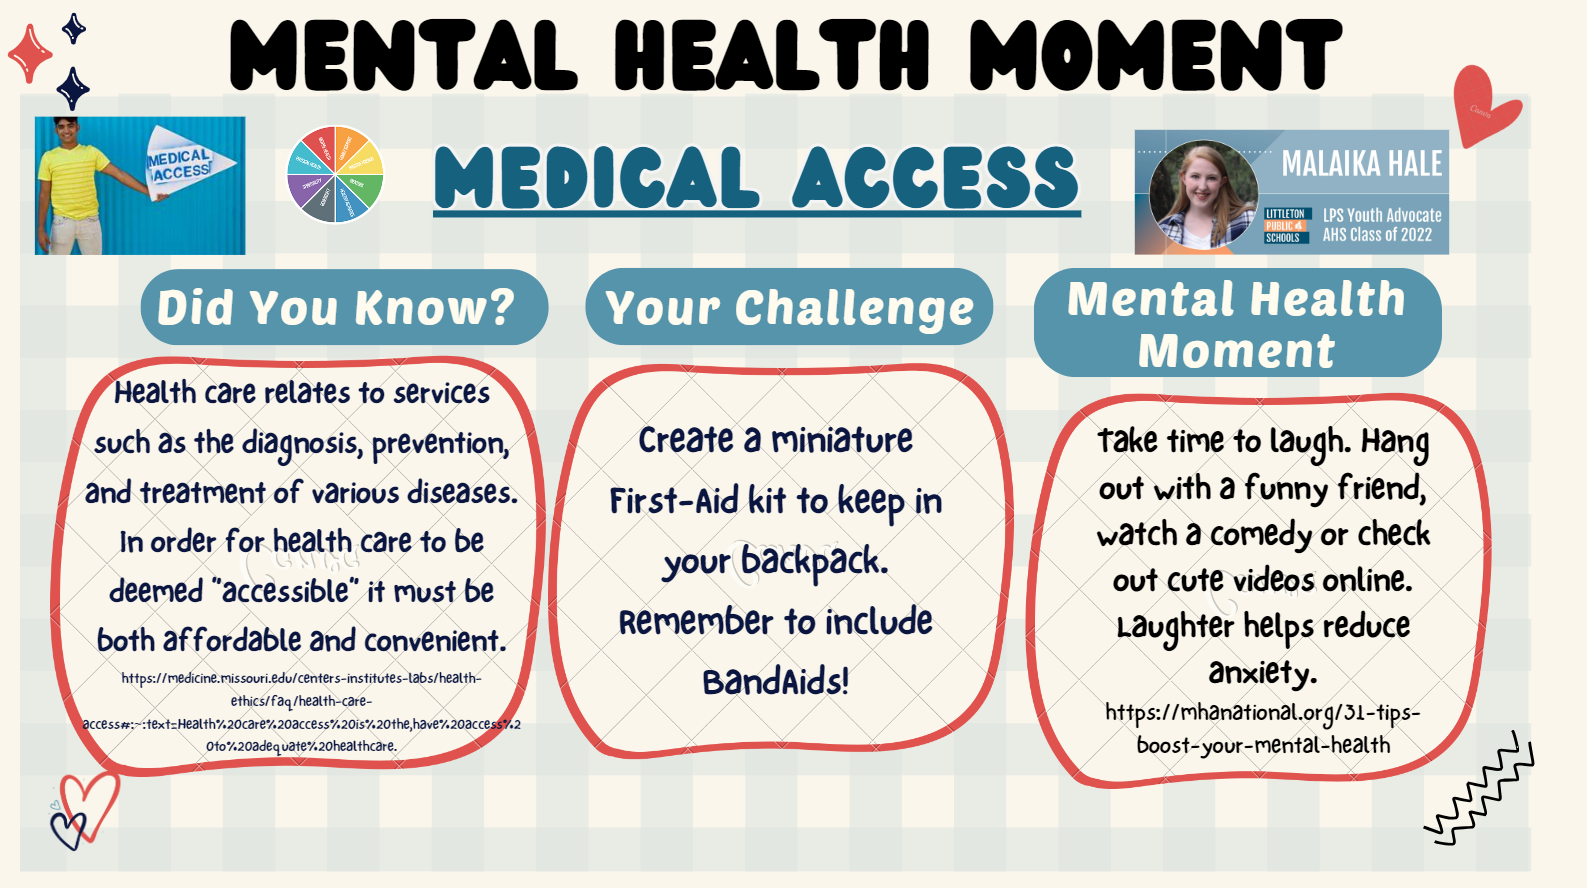 Mental Health Moment: MEDICAL ACCESS Malaika Hale, LPS Youth Advocate, AHS Class of 2022  Did you know? Health care relates to services such as the diagnosis, prevention, and treatment of various diseases. In order for health care to be deemed "accessible" it must be both affordable and convenient. https://tinyurl.com/accessiblehealthcare  Your Challenge Create a miniature First-Aid kit to keep in your backpack. Remember to include BandAids! https://tinyurl.com/boostmhtips  Mental Health Moment Take time to laugh. Hang out with a funny friend, watch a comedy or check out cute videos online. Laughter helps reduce anxiety. 